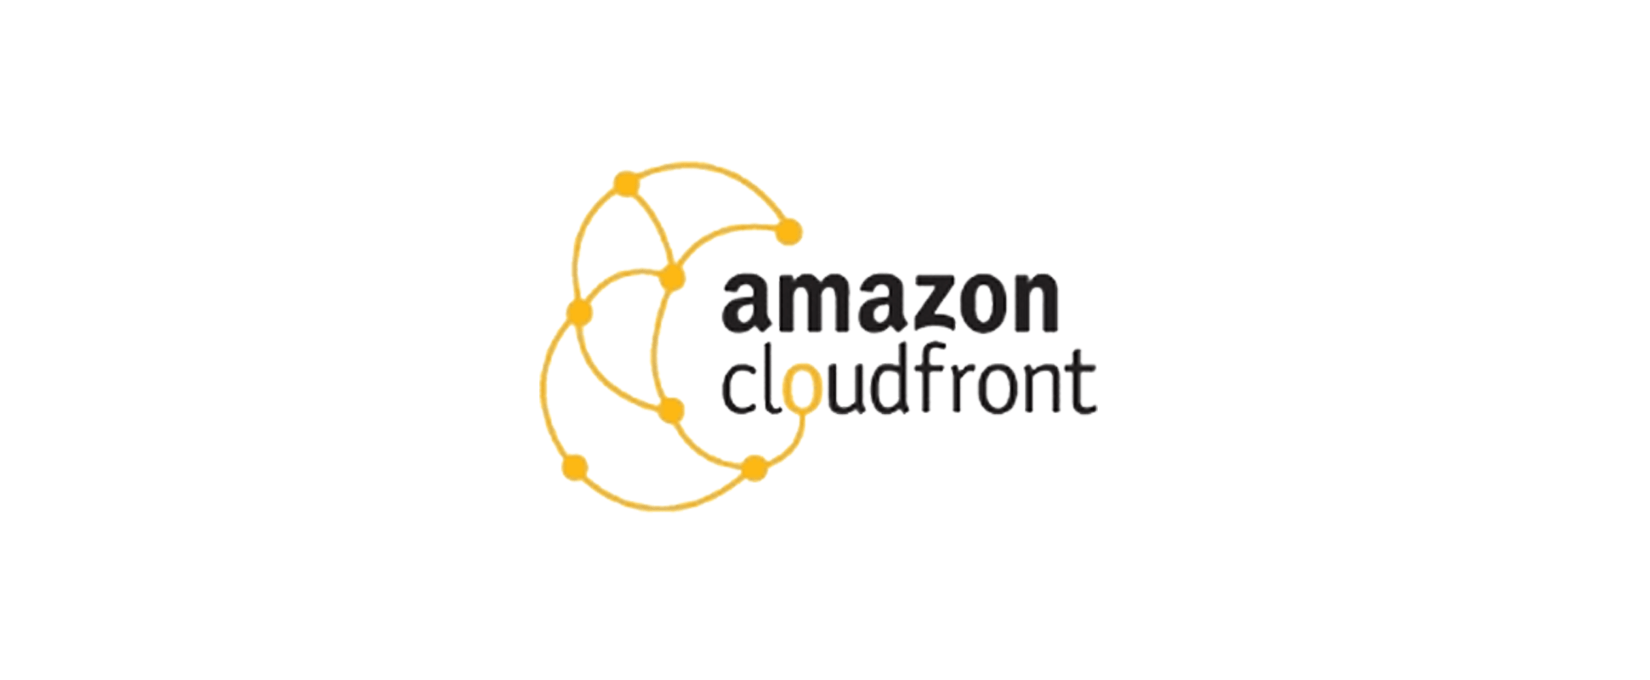 10 Frequently asked Questions about Amazon CloudFront